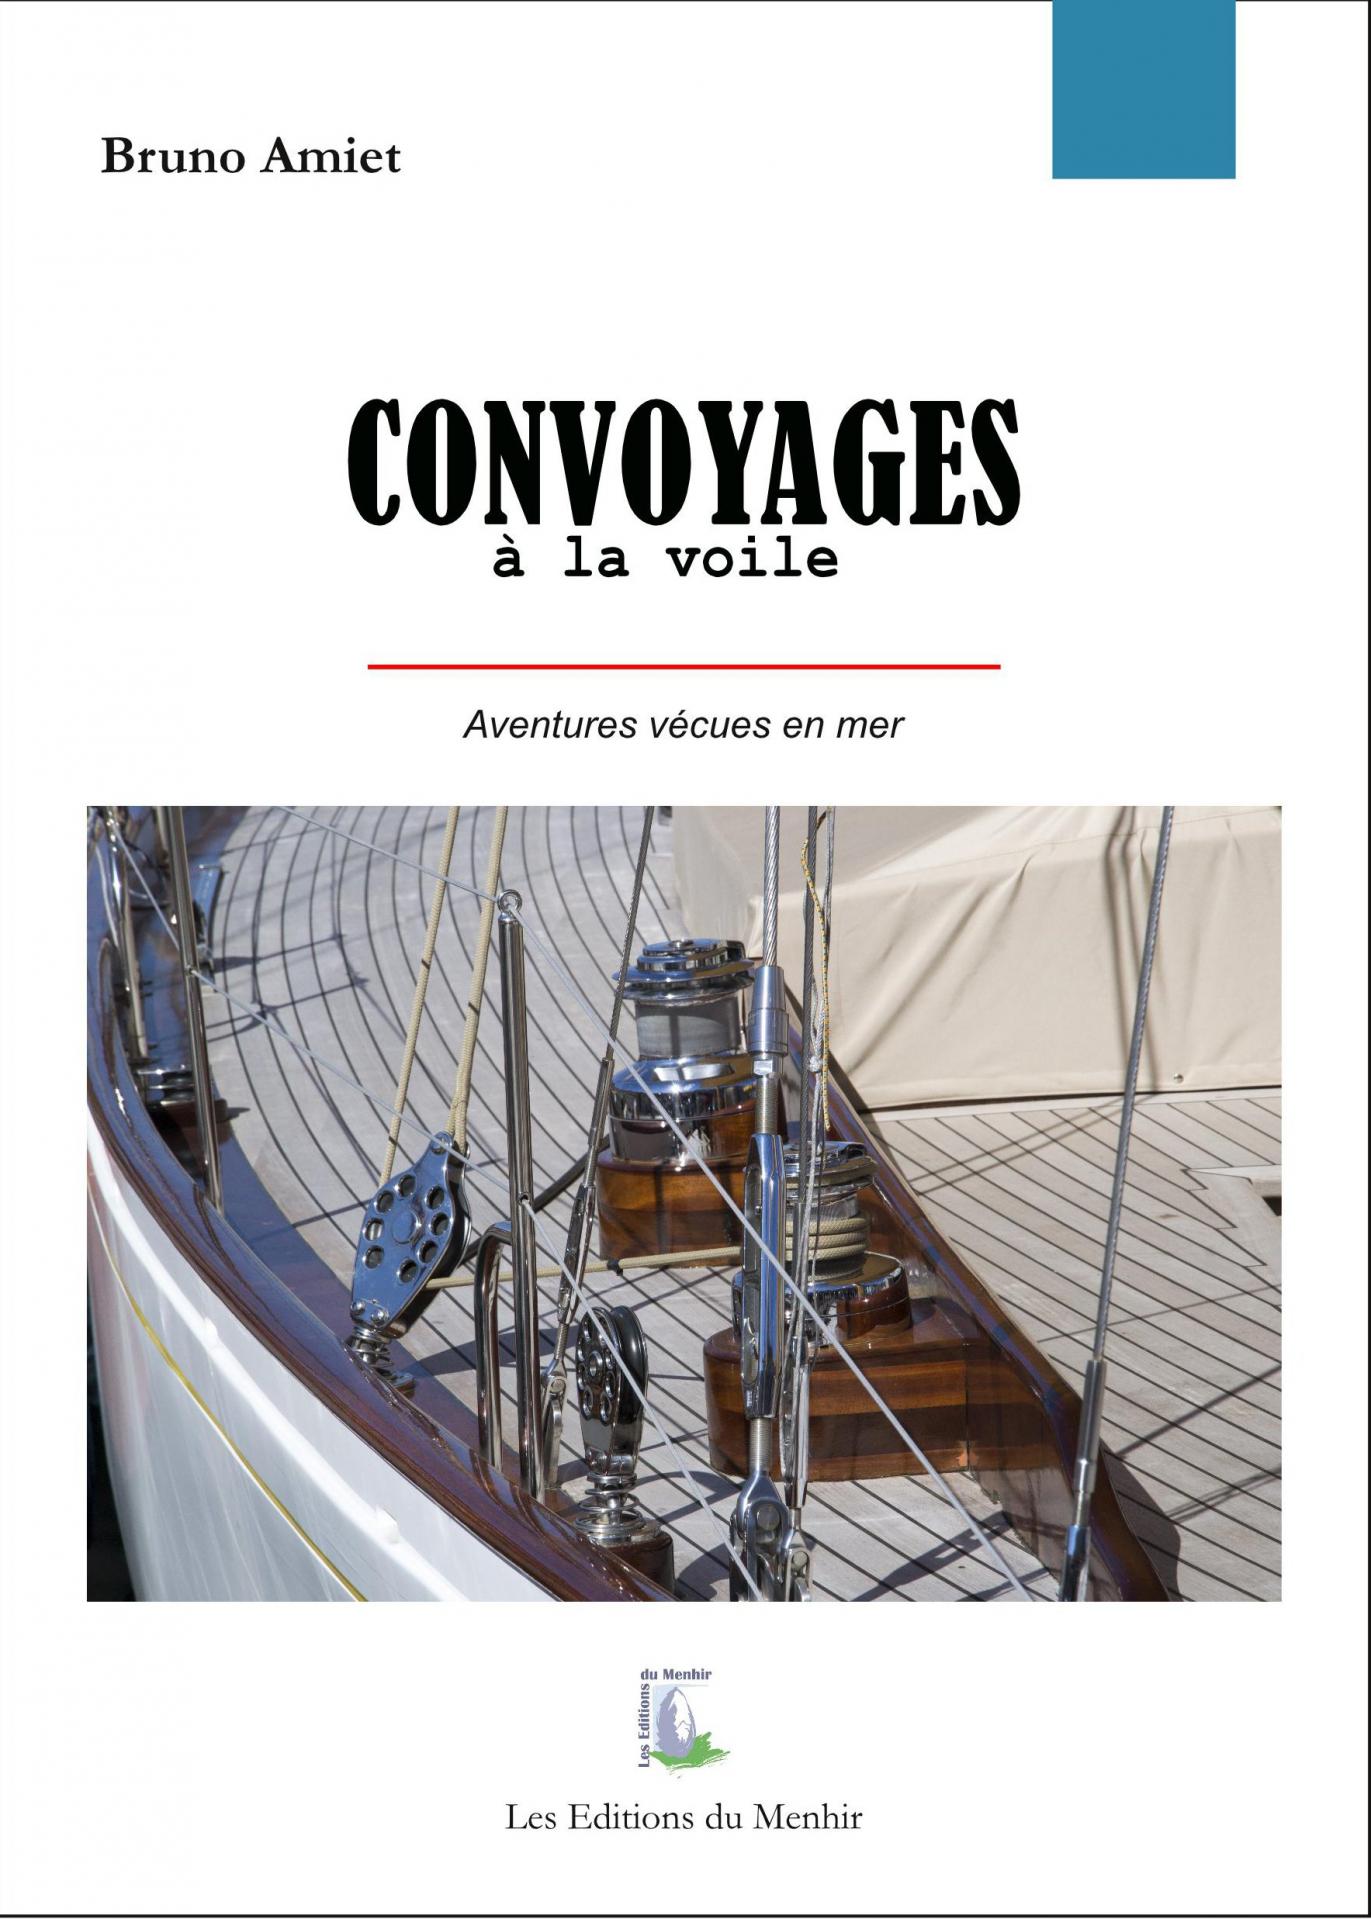 Convoyages couv5 1